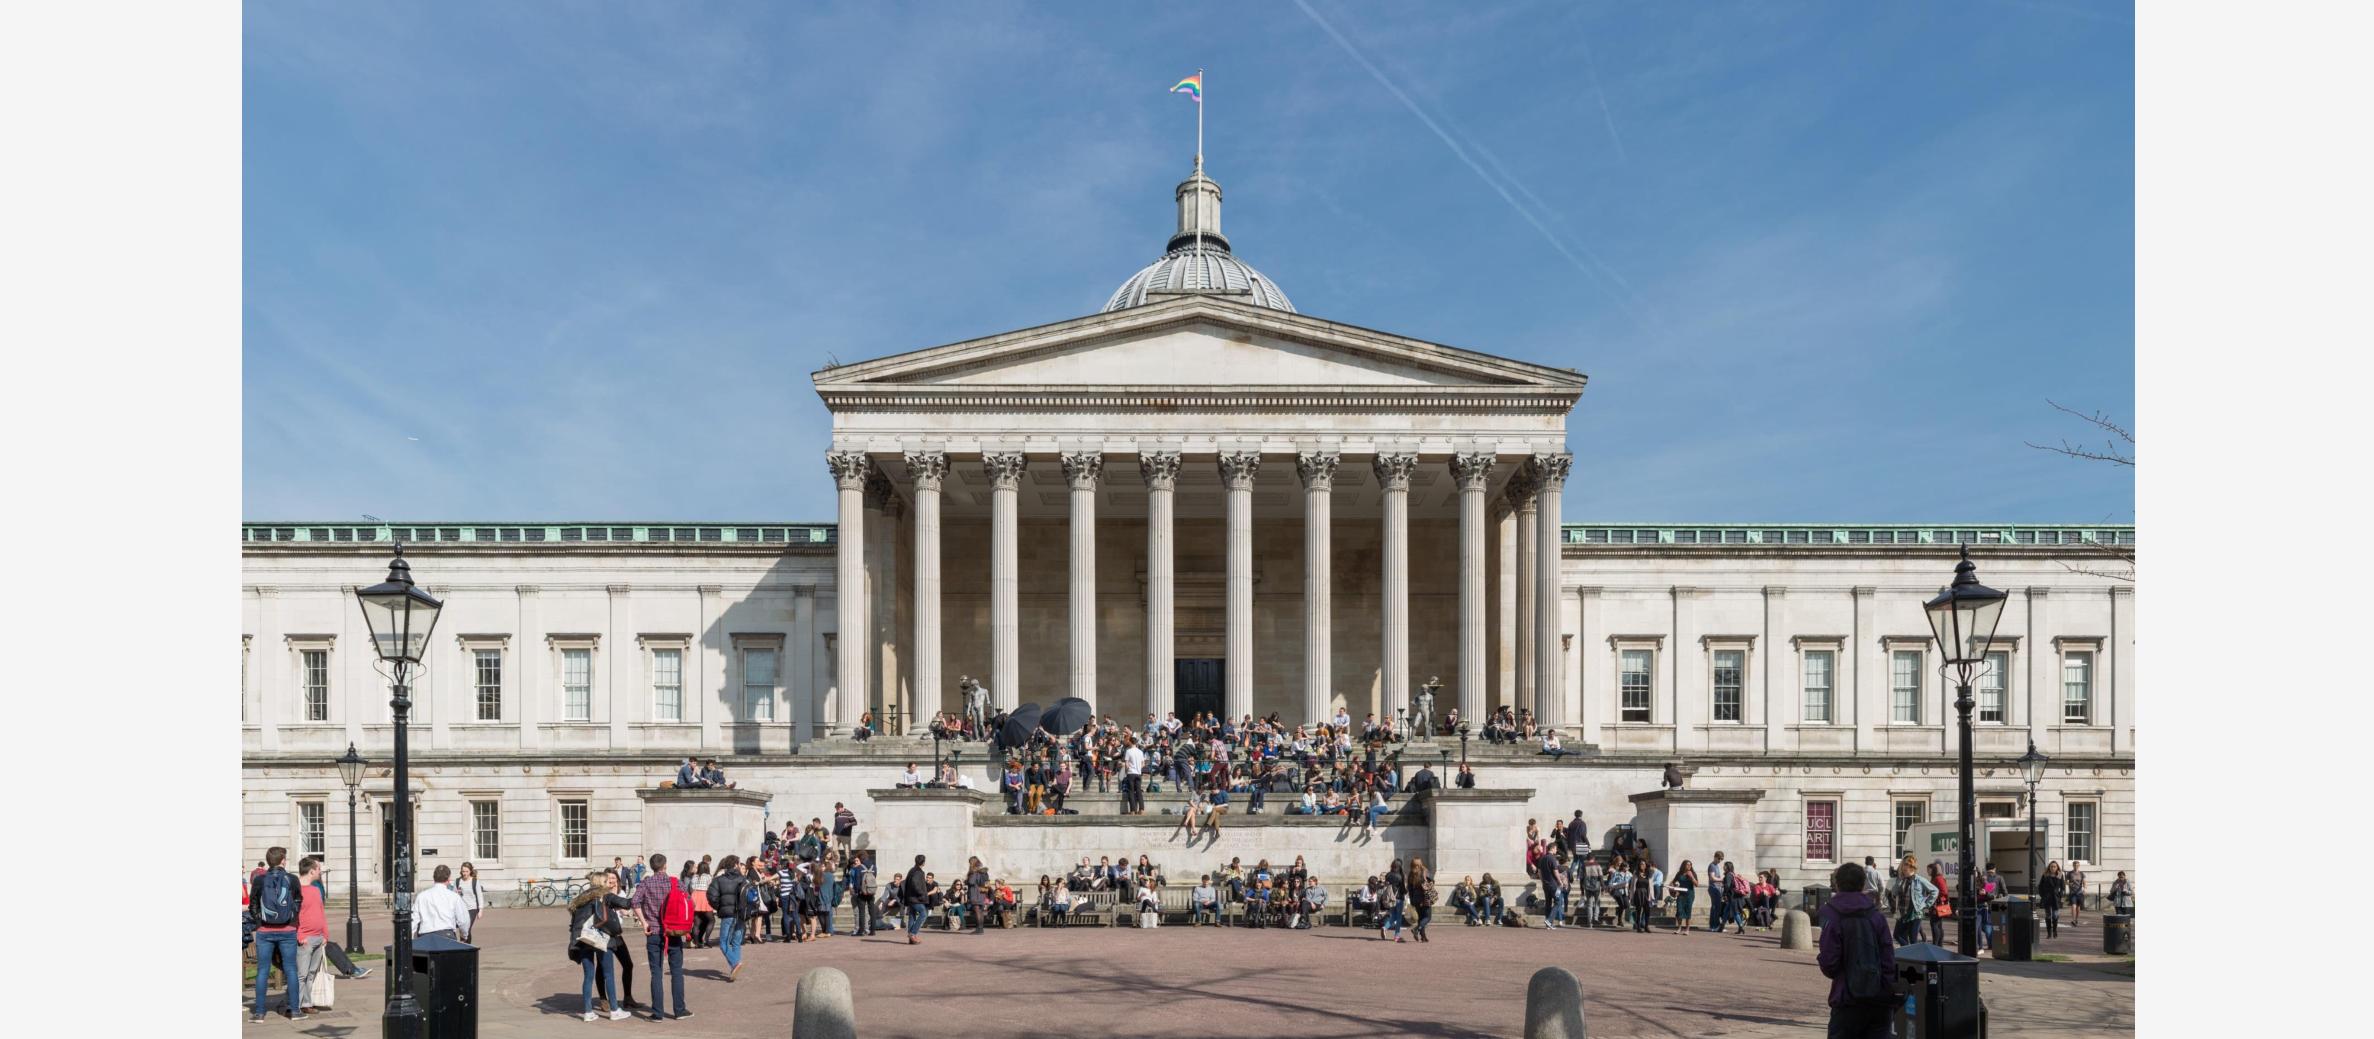 University College London academics to decide on rescinding anti-Semitism definition in New Year